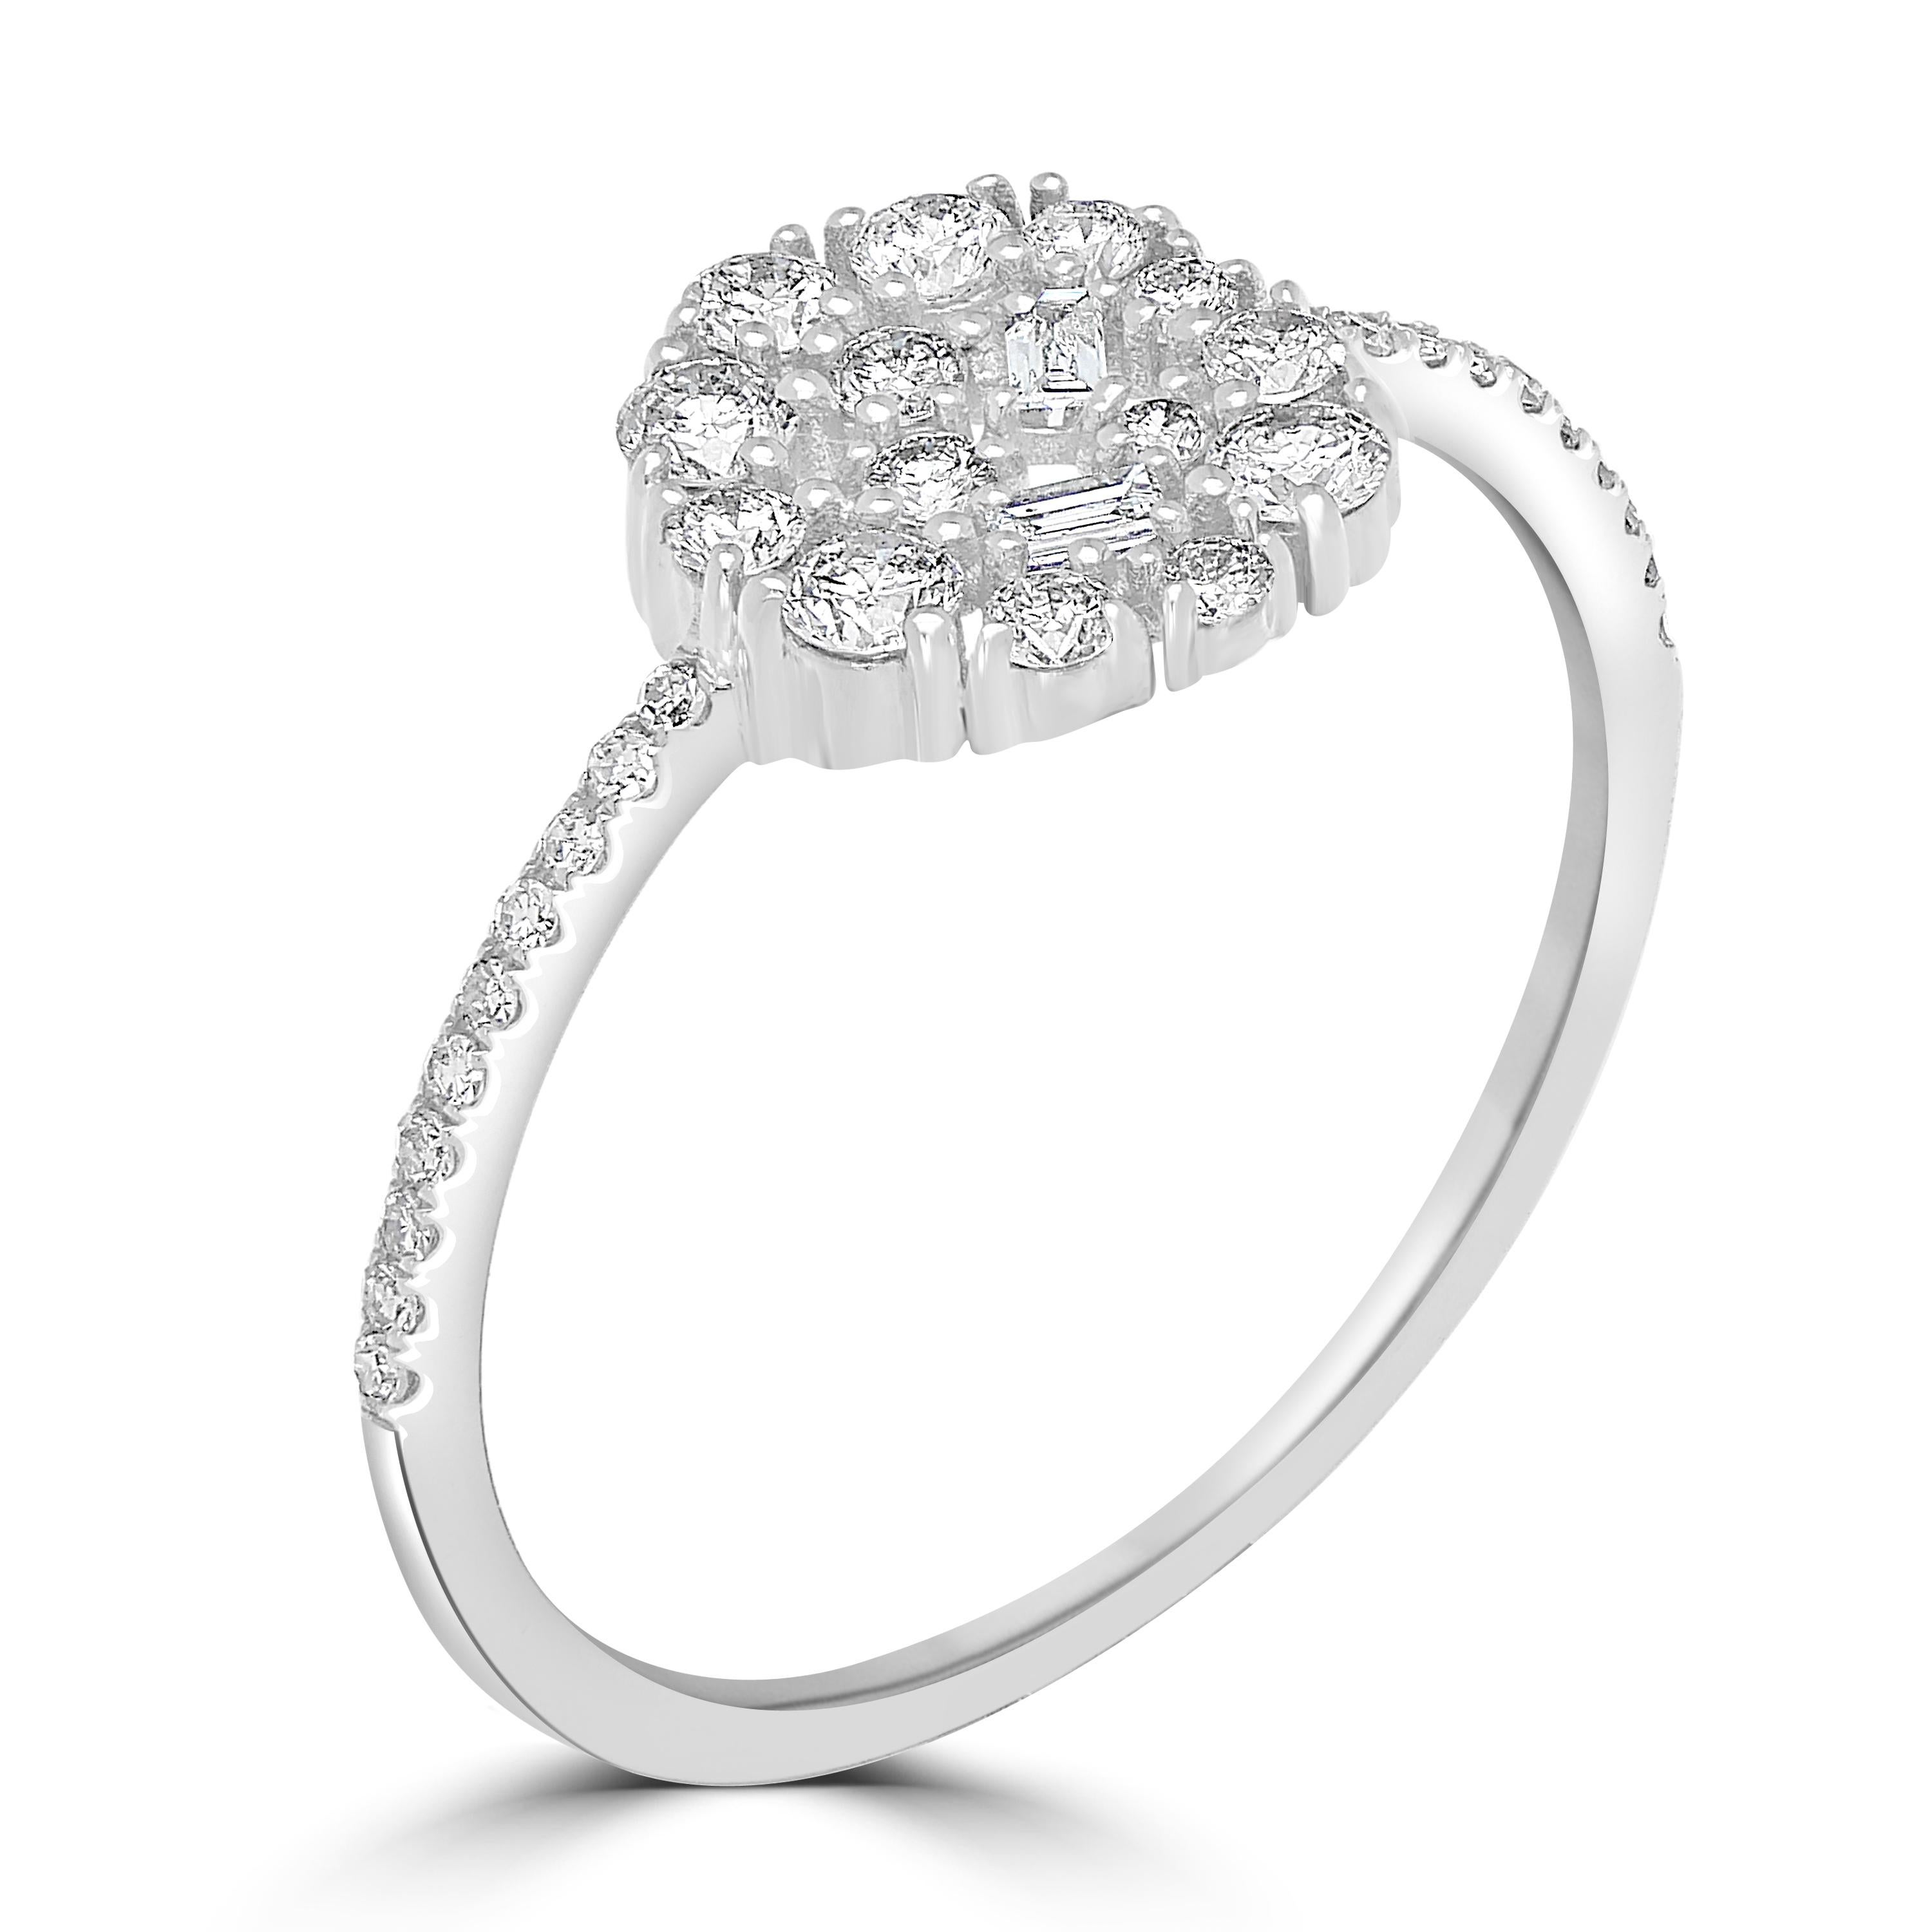 For Sale:  Luxle 3/8 Carat T.W. Diamond Cluster Ring in 14k White Gold 3